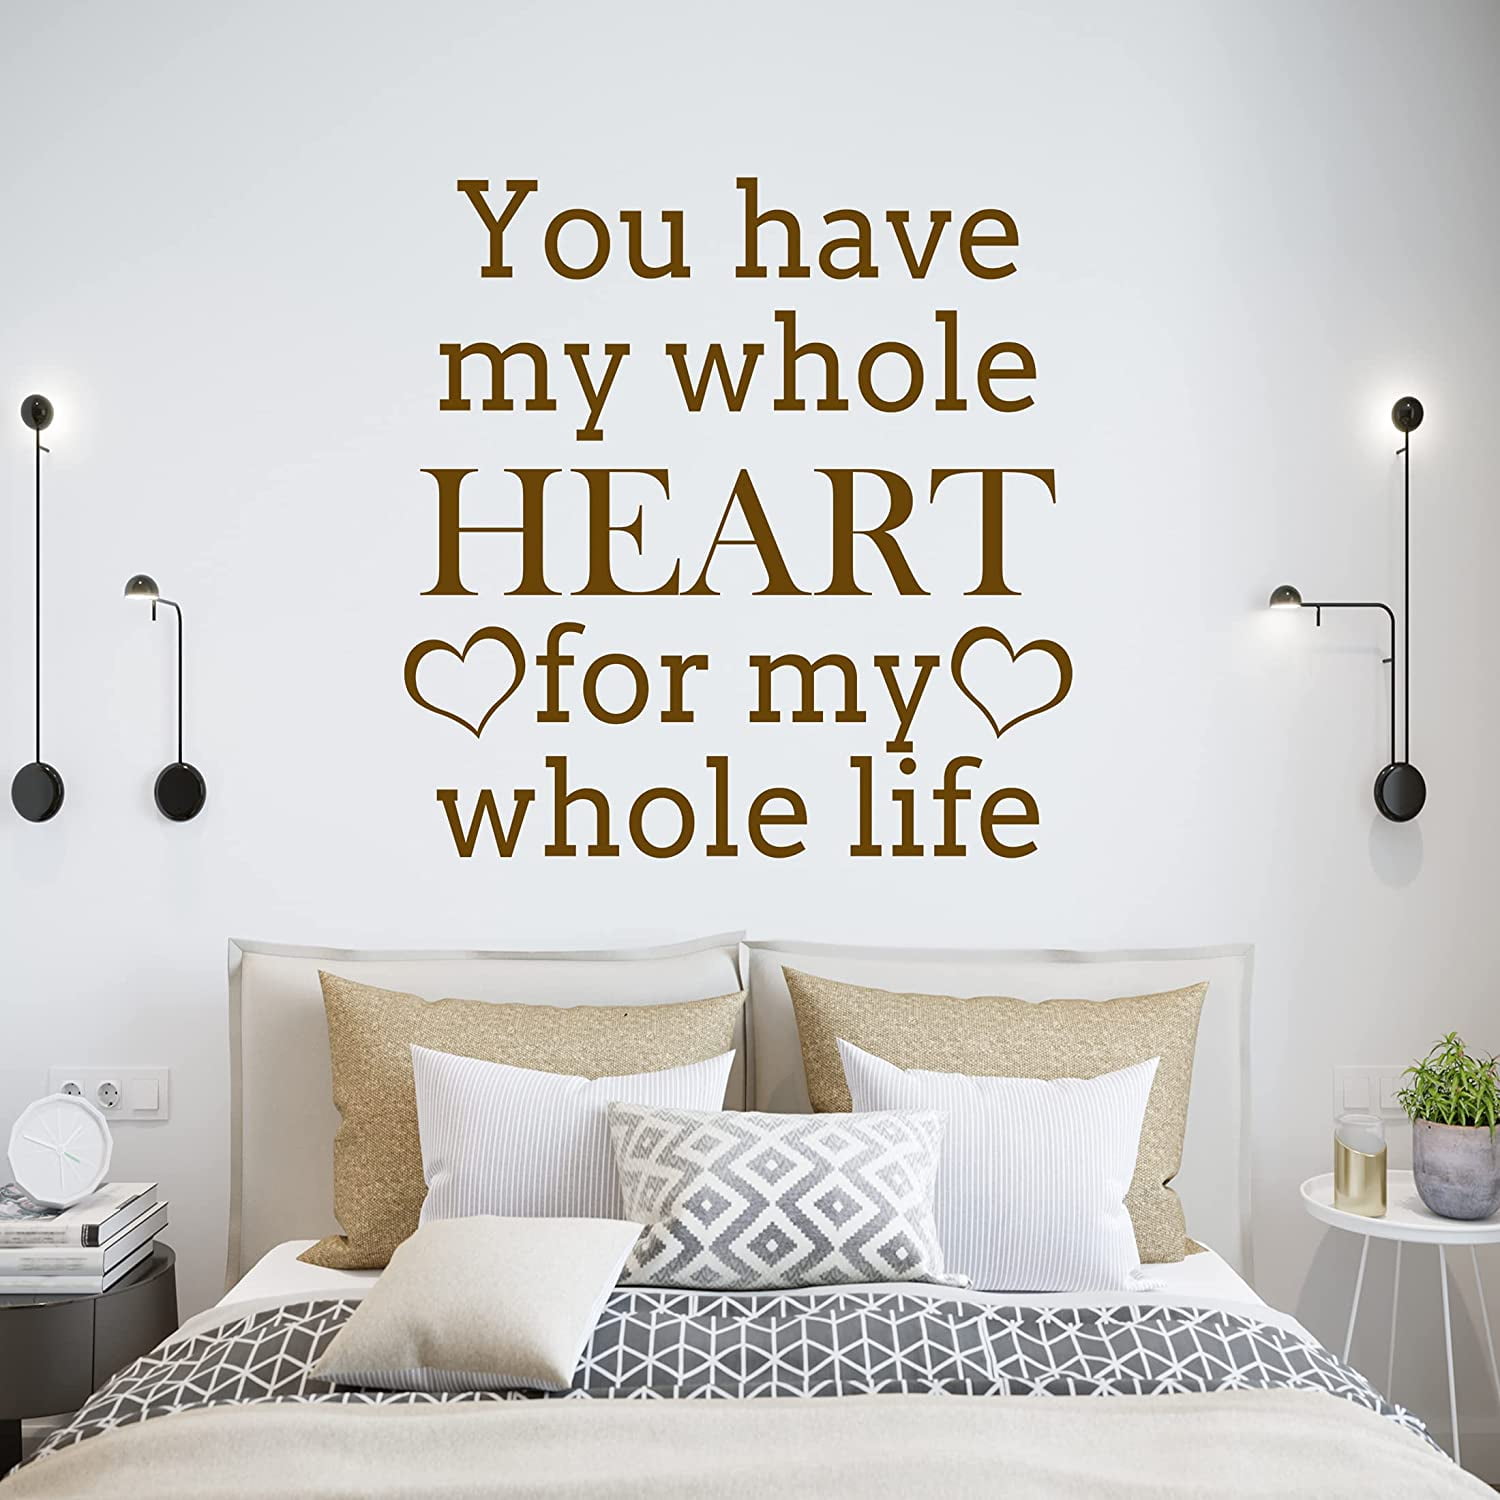 Quote 14* x 25* Vinyl Wall Art Decal Find Your Joy And Let It Run Your Life 